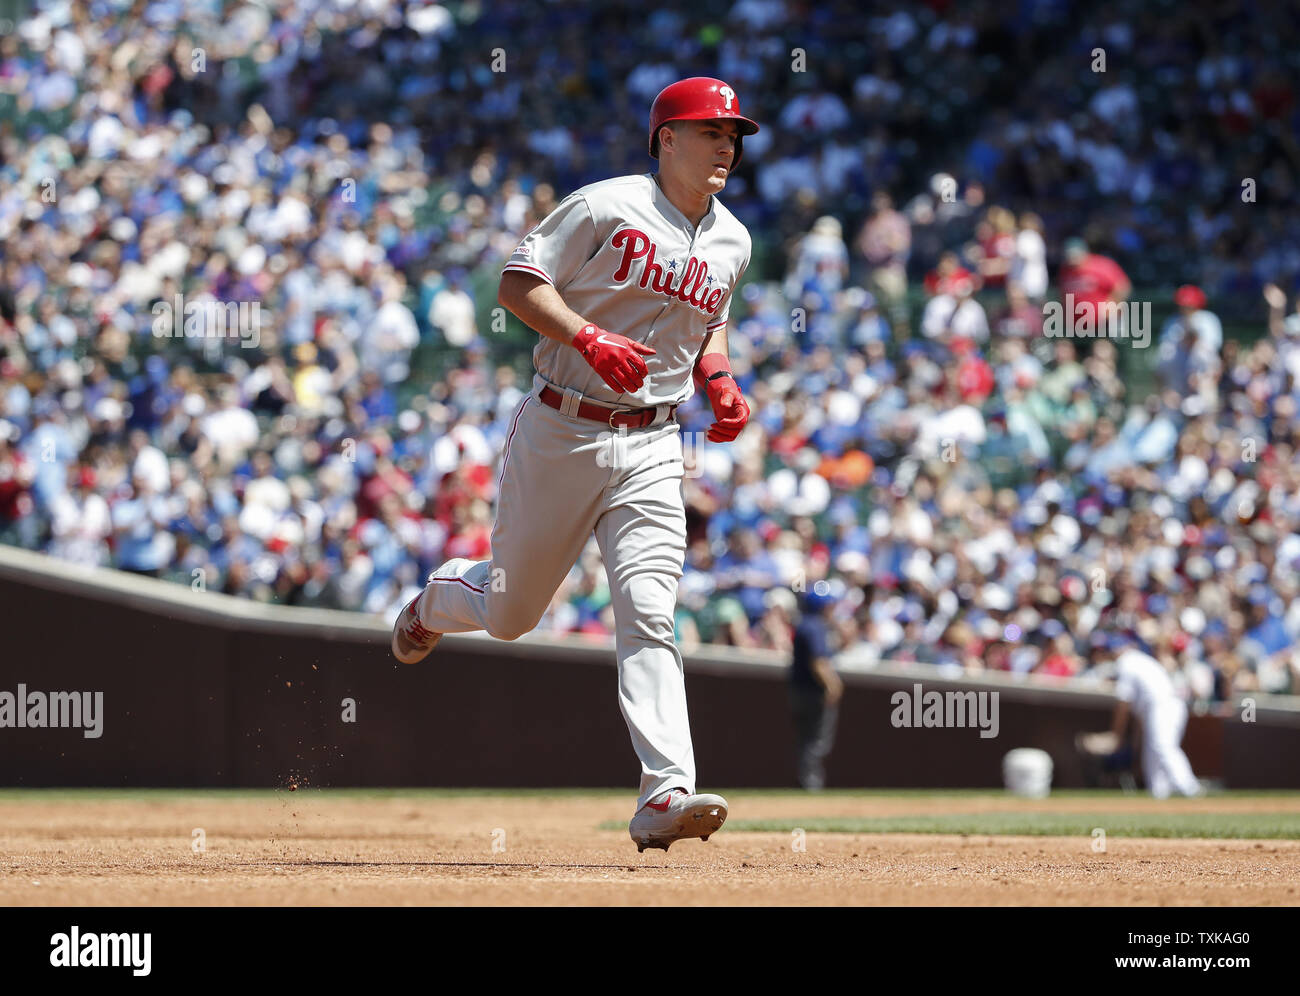 Philadelphia Phillies' J.T. Realmuto rounds the bases after hitting a solo home run against the Chicago Cubs in the third inning at Wrigley Field on May 23, 2019 in Chicago. Photo by Kamil Krzaczynski/UPI Stock Photo